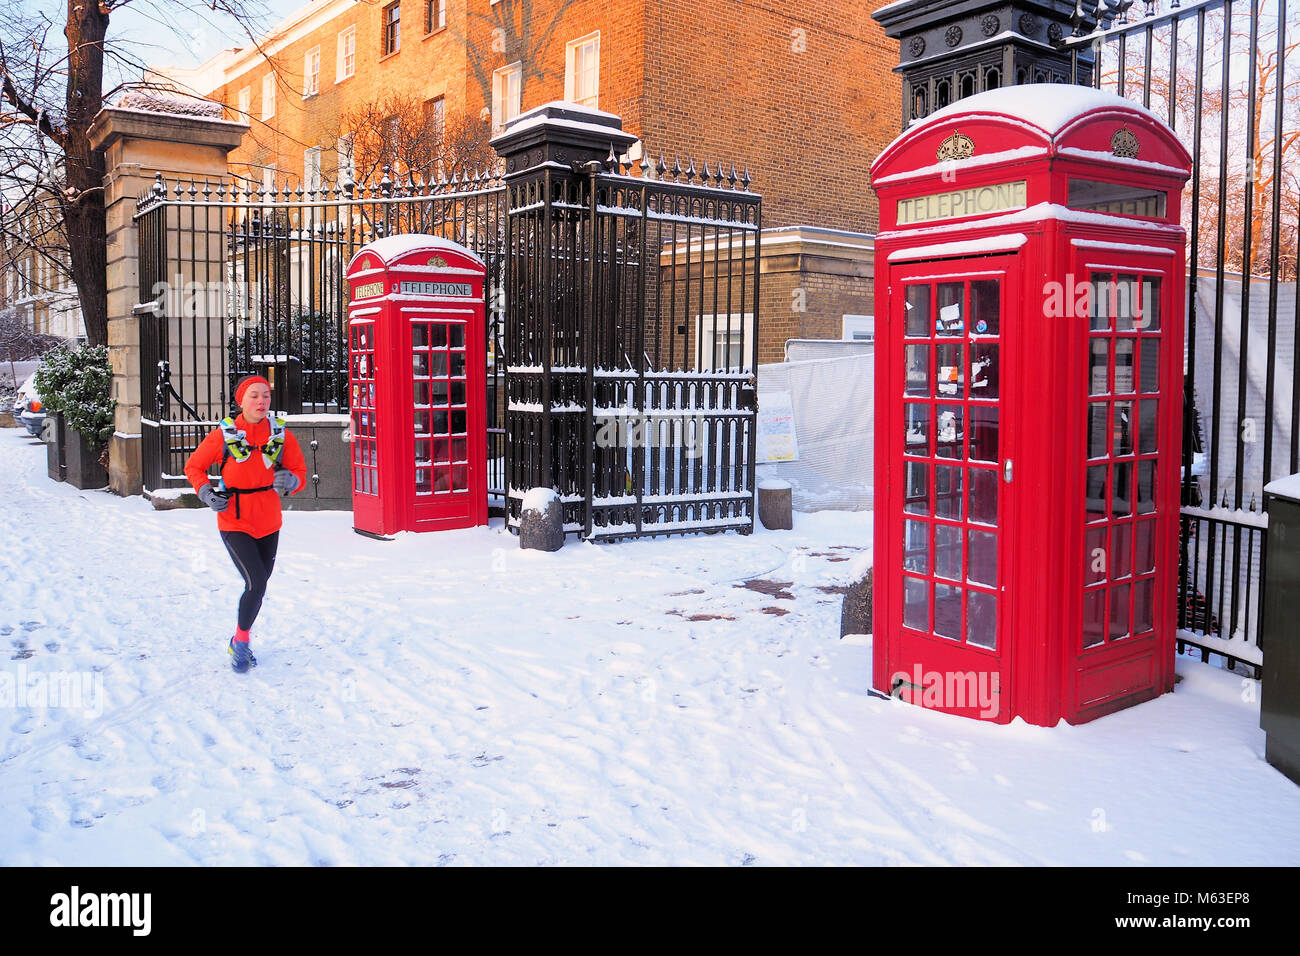 London, UK. 28th Feb, 2018. UK Weather: Central London was blanketed in snow as the cold weather front swept across South East England.A woman jogs past Brompton cemetery © Brian Minkoff / Alamy Live News Stock Photo